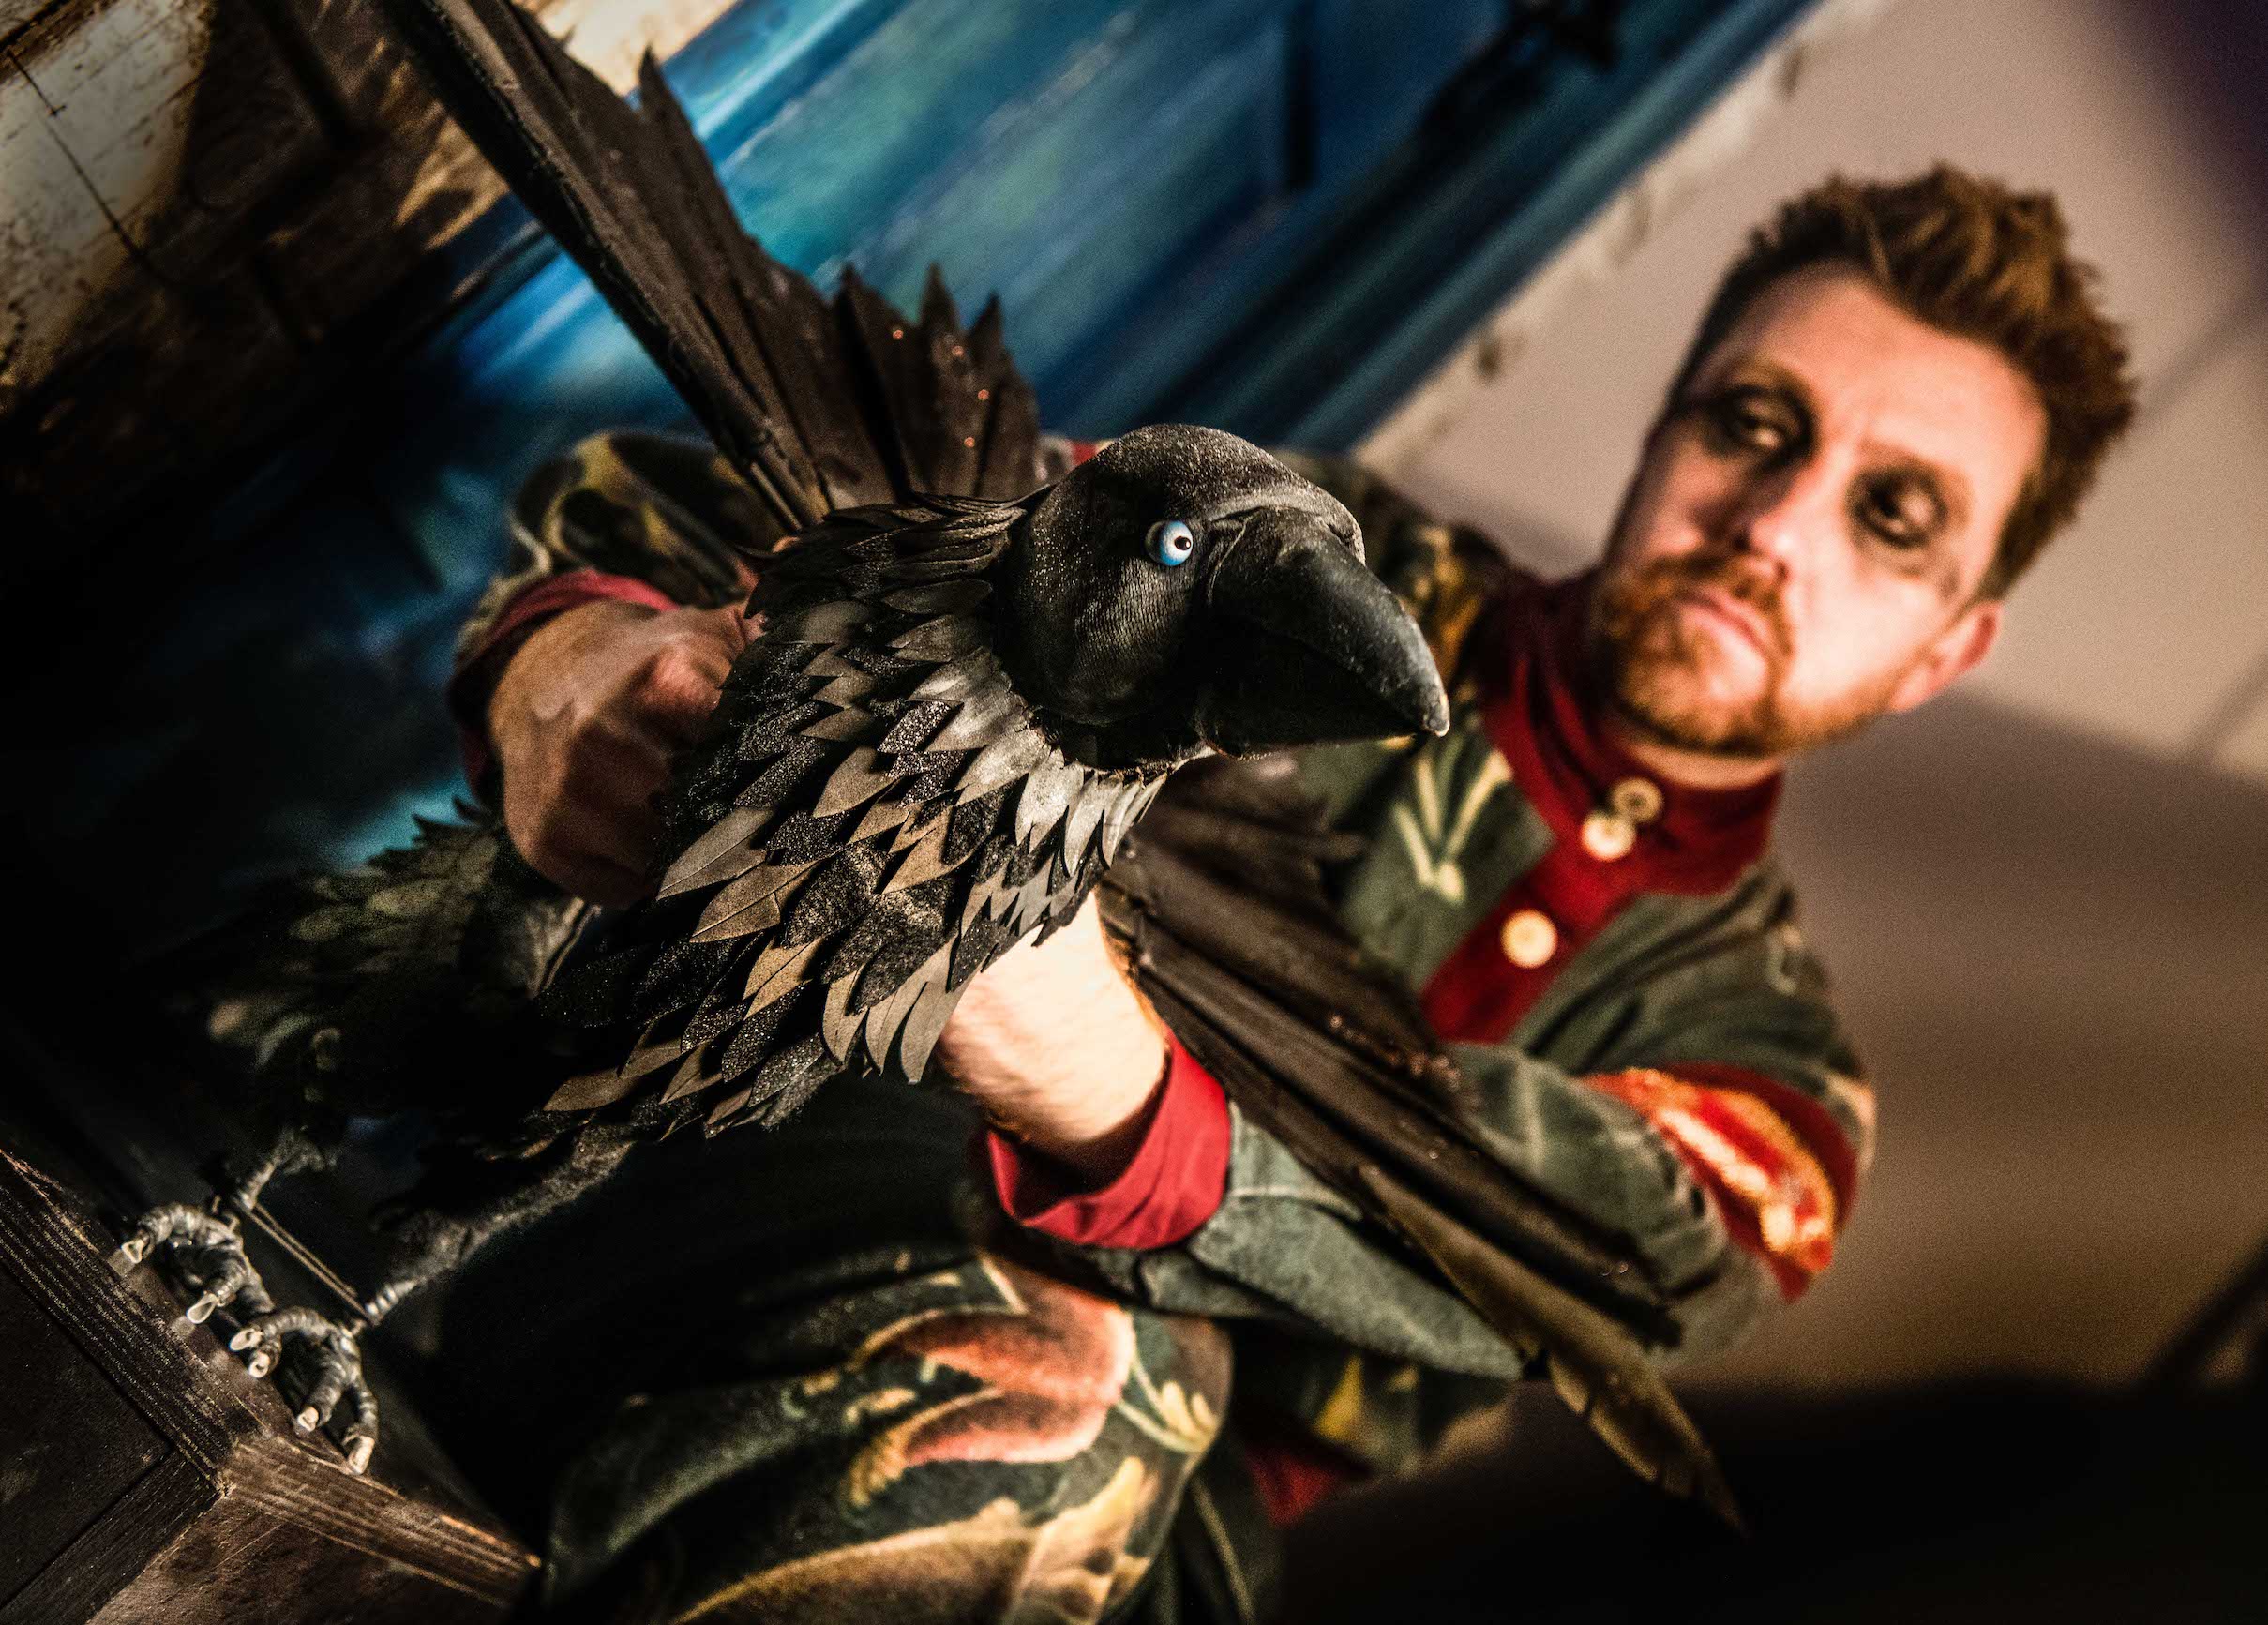 eJack the jackdaw, with puppeteer Dan Willis, in The Hous with Chicken Legs